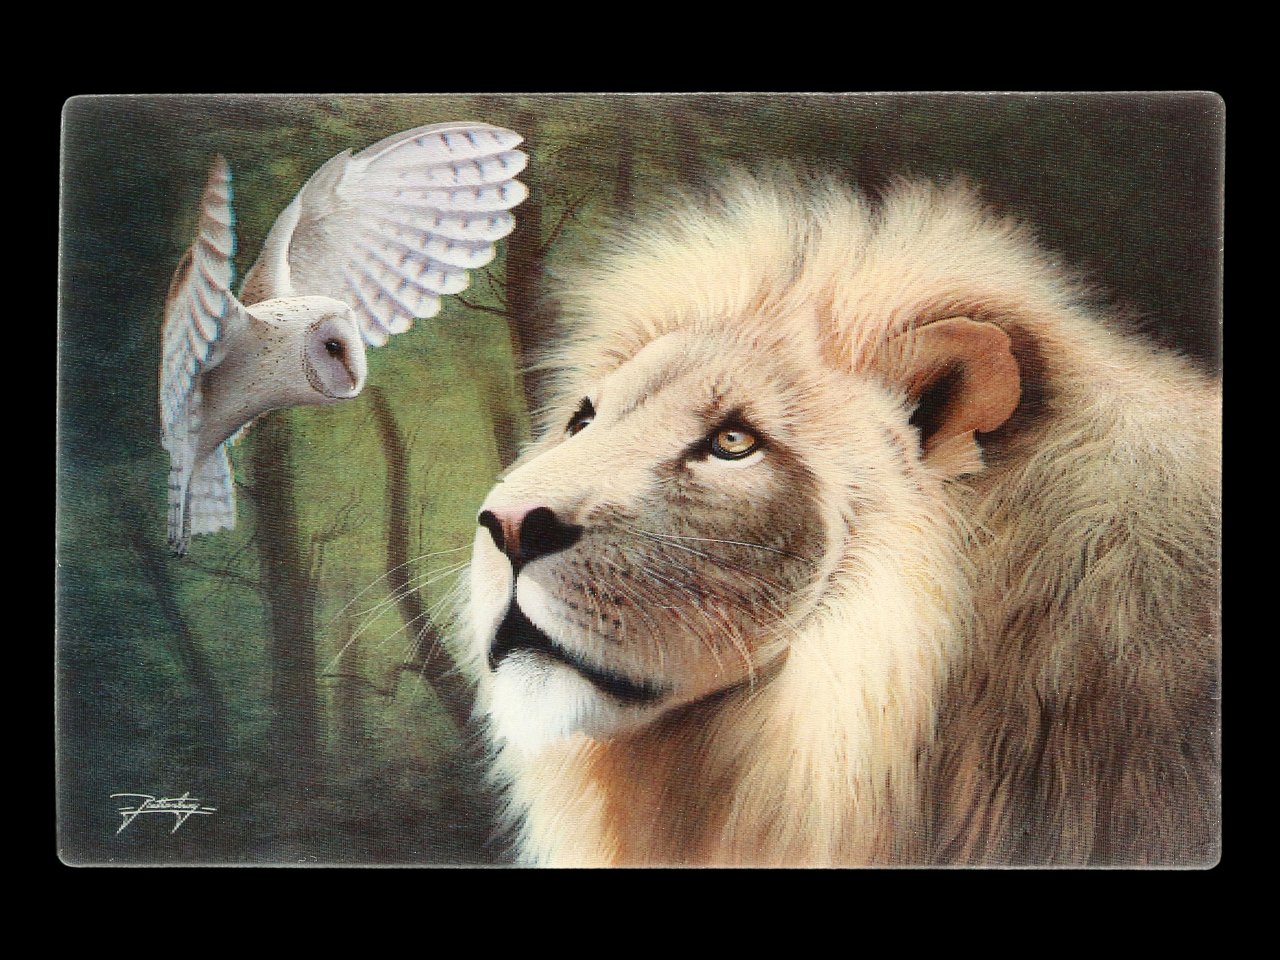 3D Postcard with Owl and Lion - Meeting of the Minds